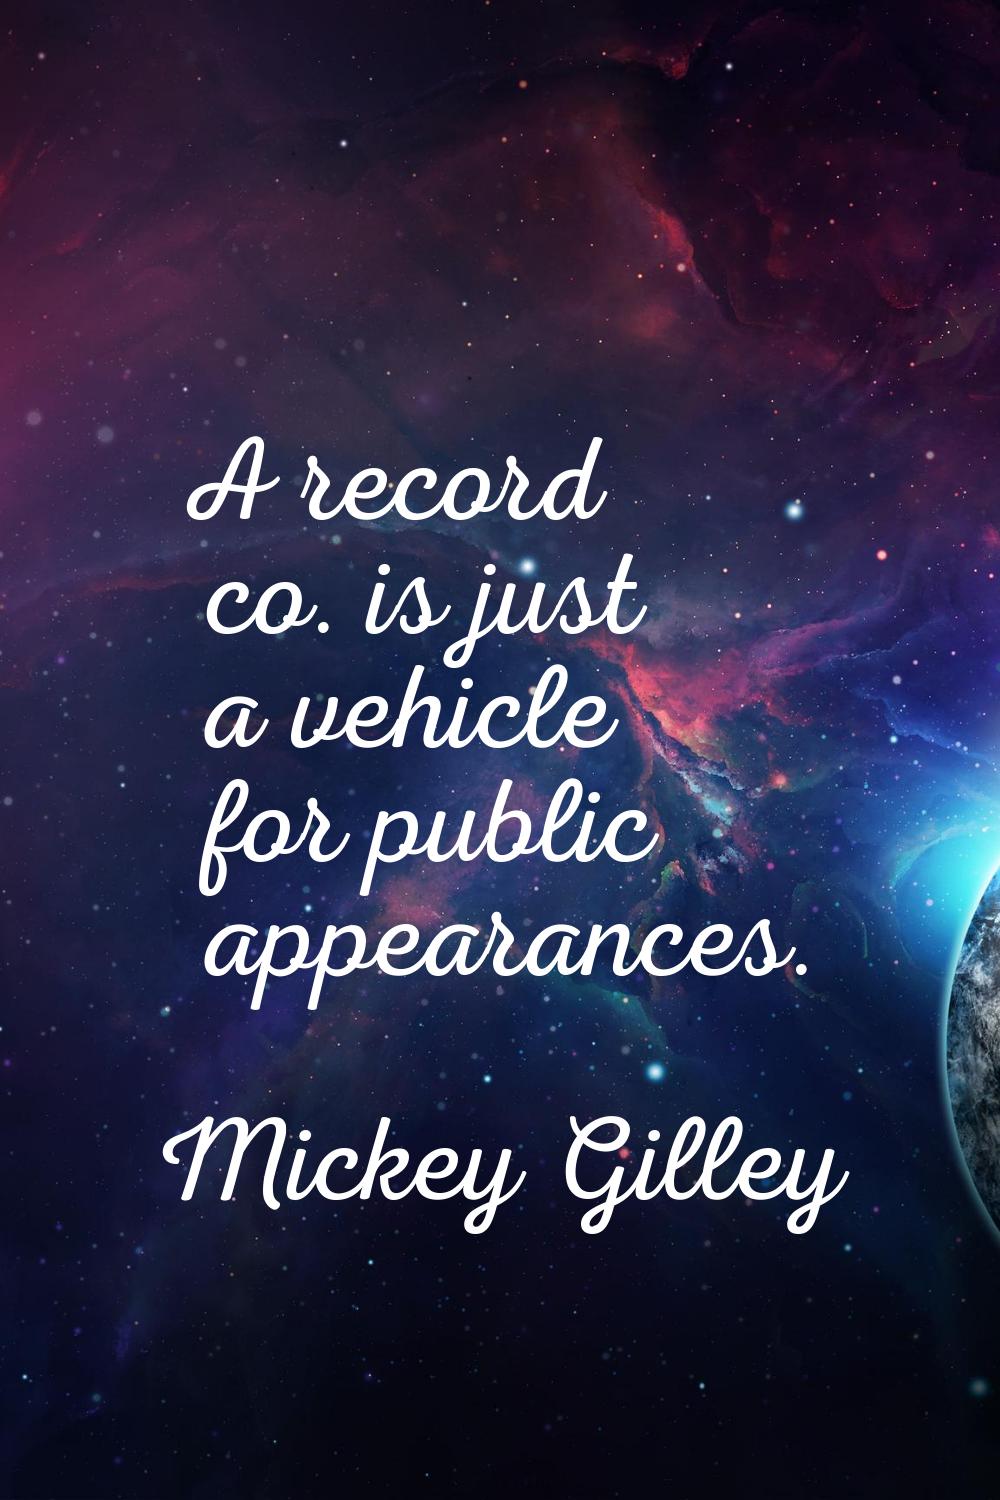 A record co. is just a vehicle for public appearances.